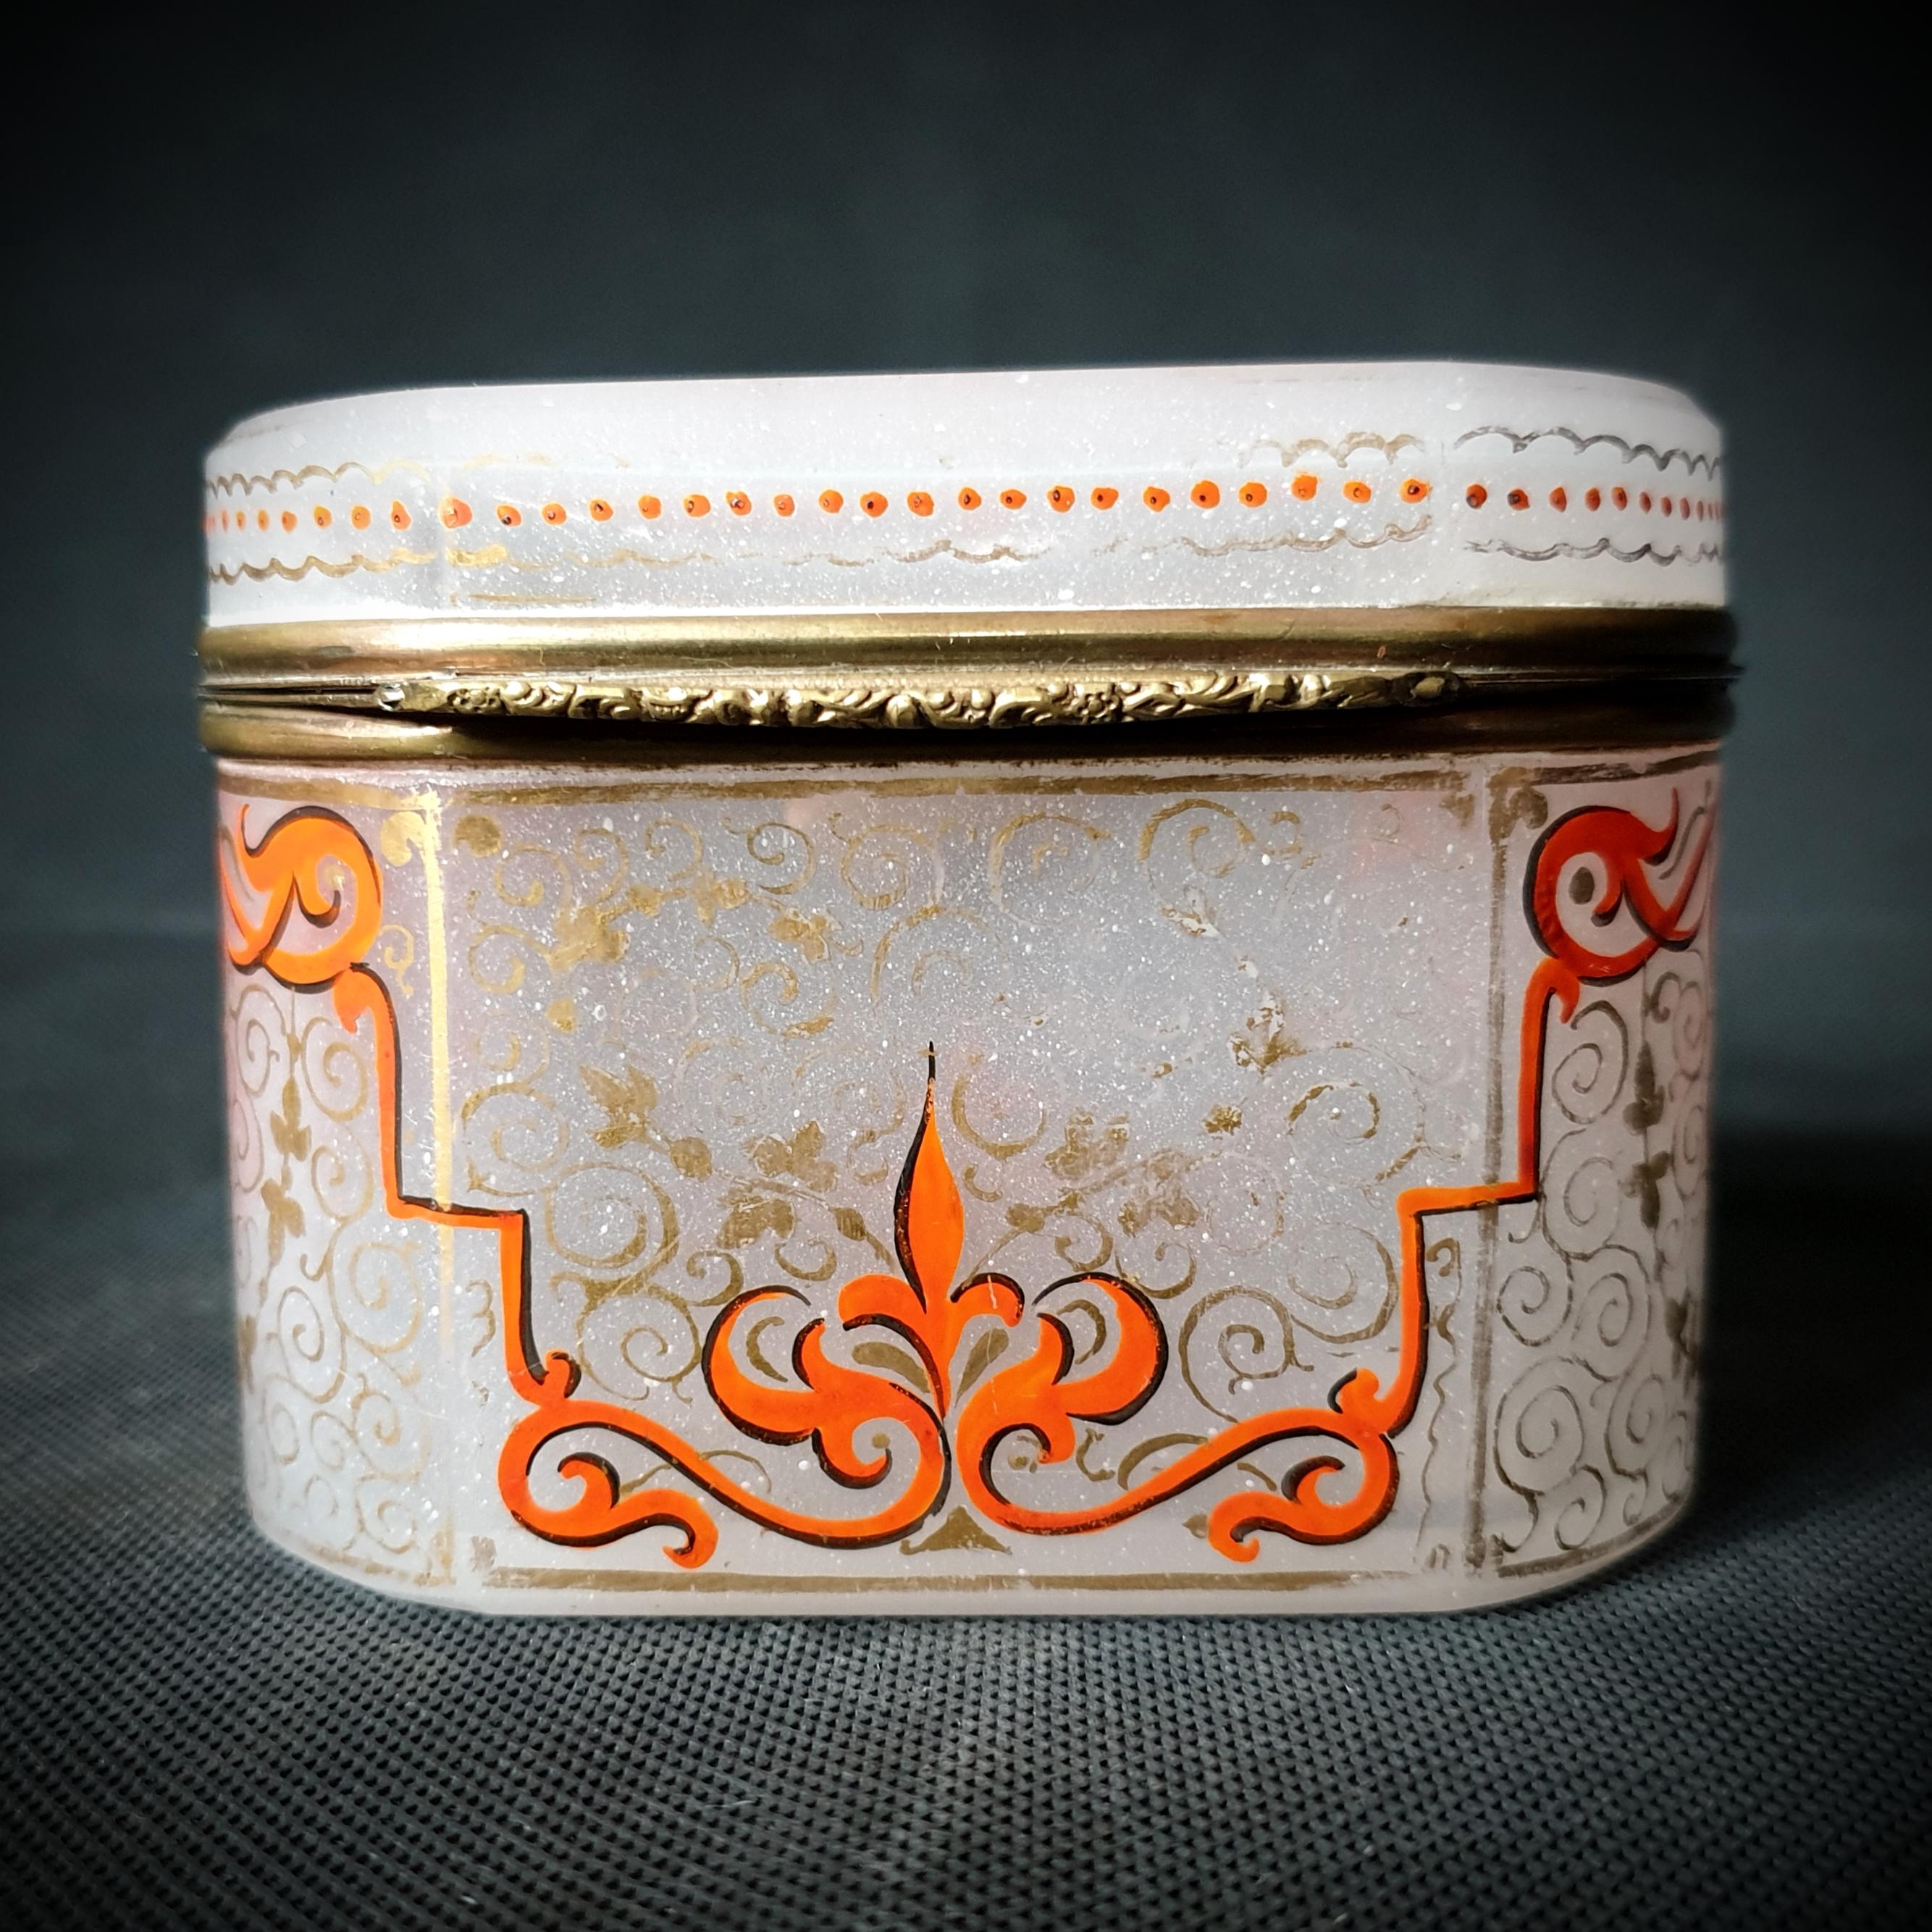 This beautiful opaline glass and copper box was made by skilled French craftspeople between the years 1850 and 1900. The orange-red Moser flower designs on the white milky glass are beautiful and sophisticated, giving any space a touch of old-world